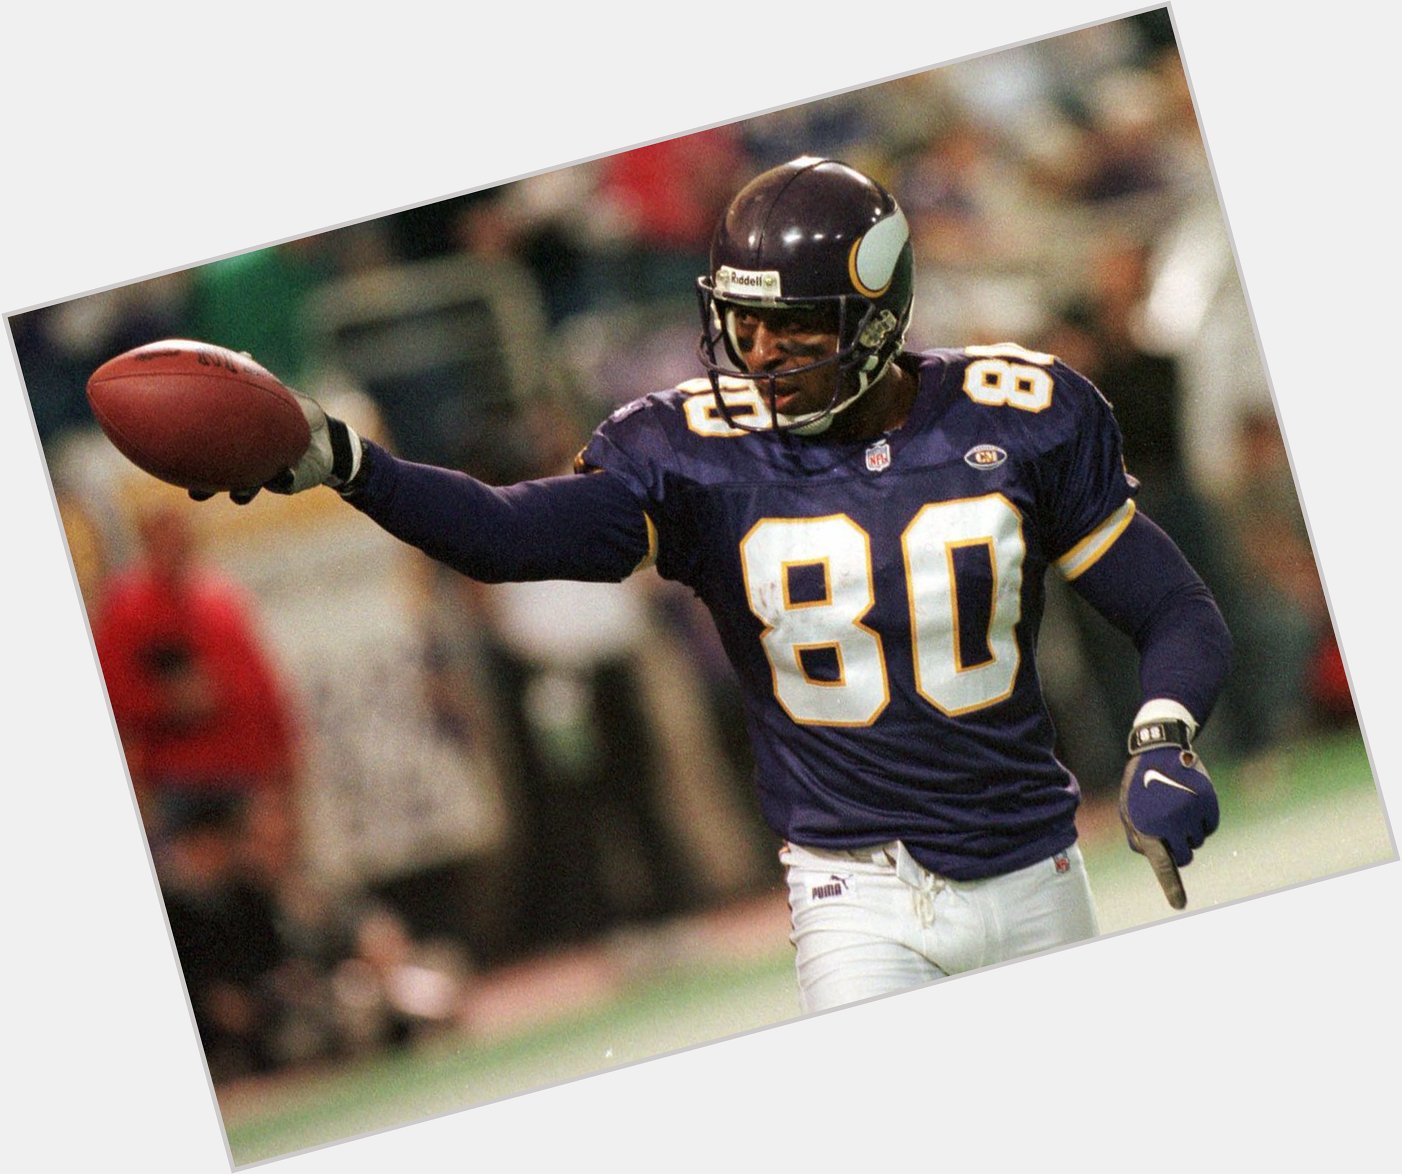 Happy Birthday to Cris Carter, who turns 50 today! 